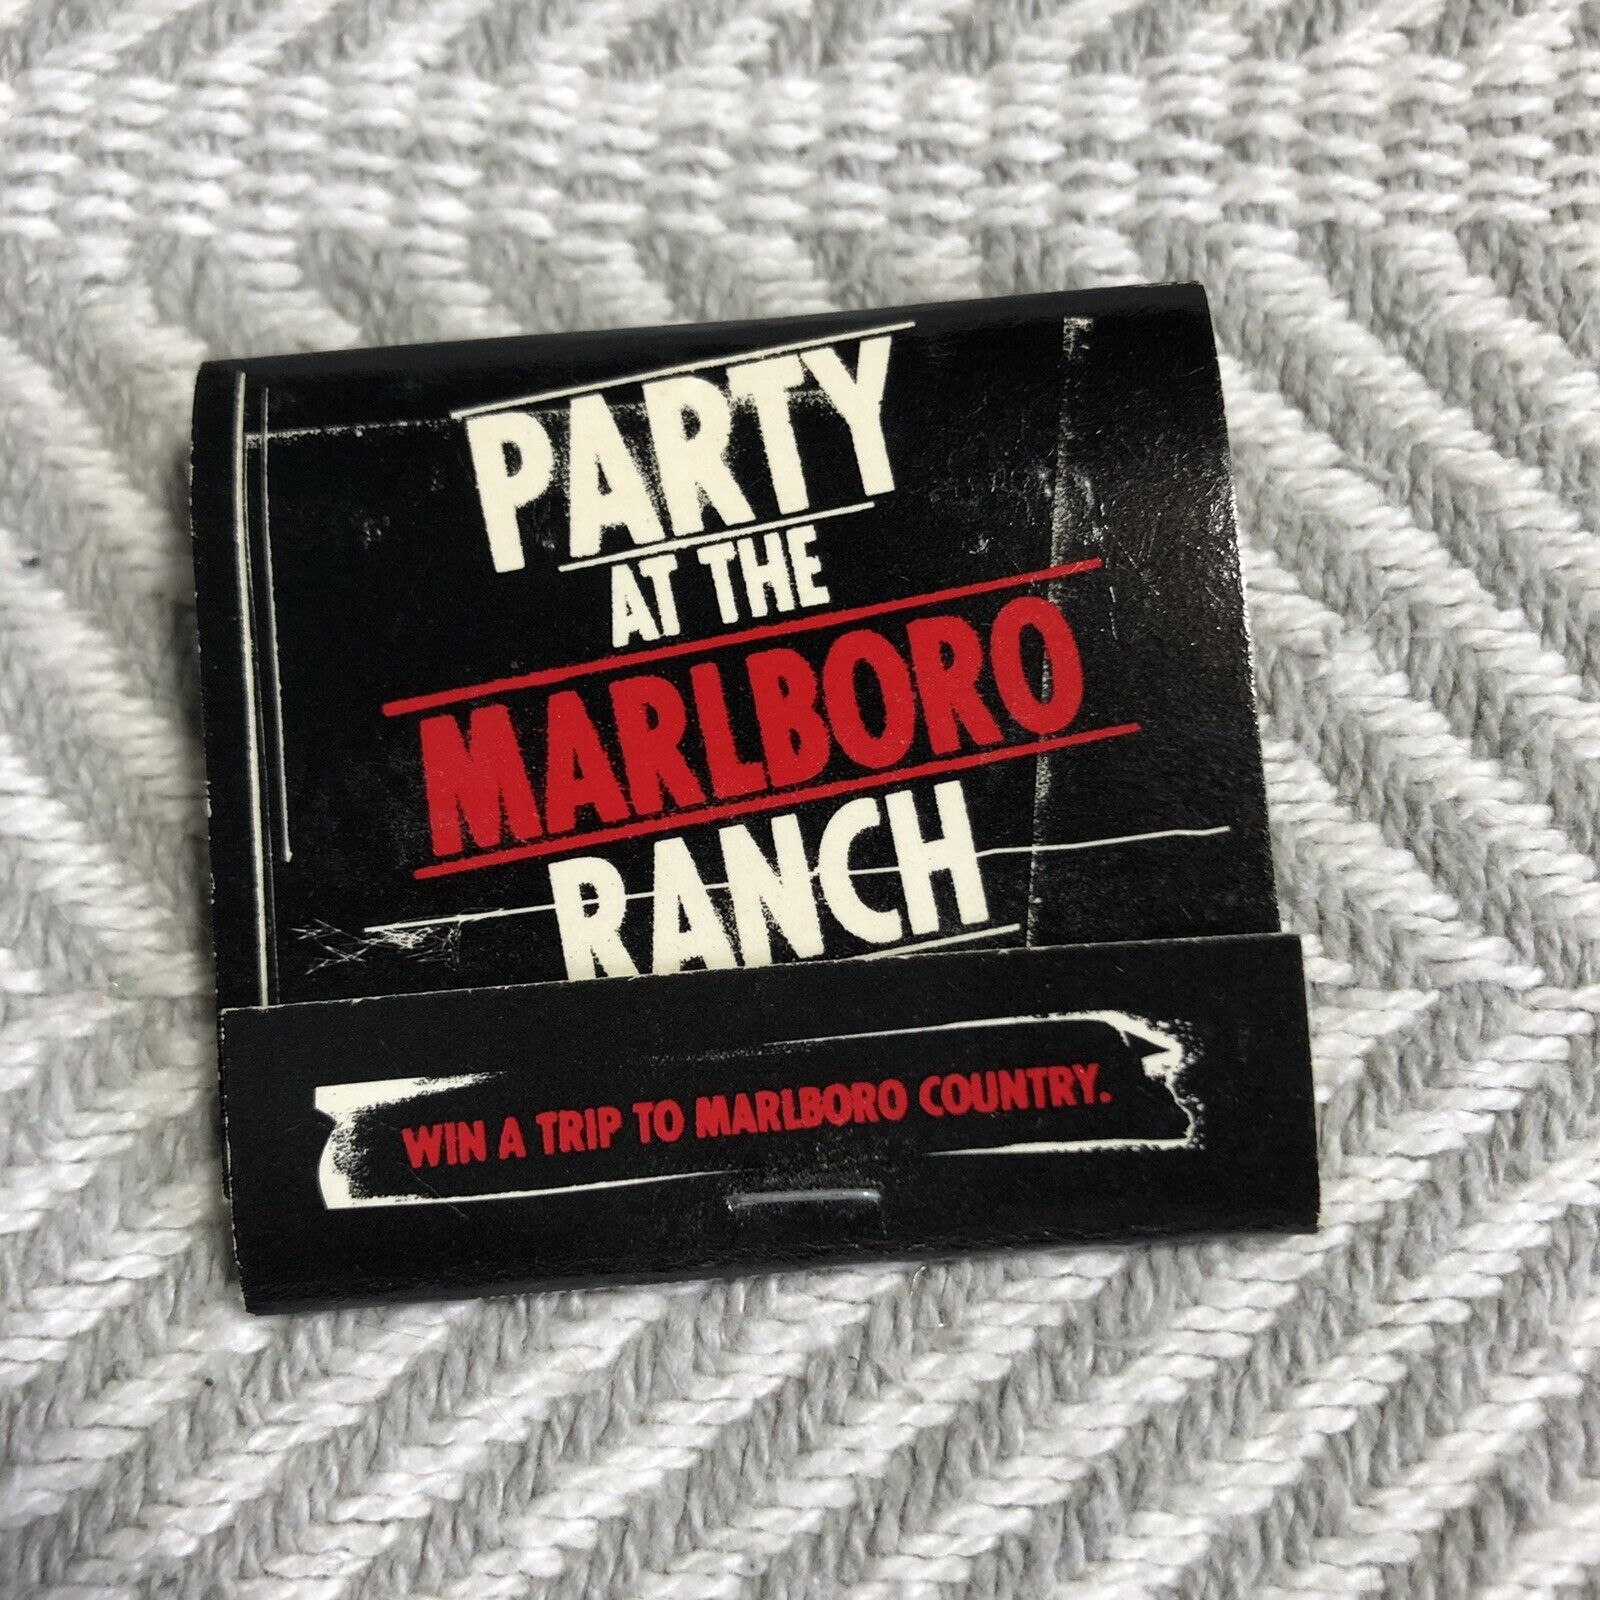 Party At The Marlboro Ranch Vintage Matchbook Black & Red Matches 